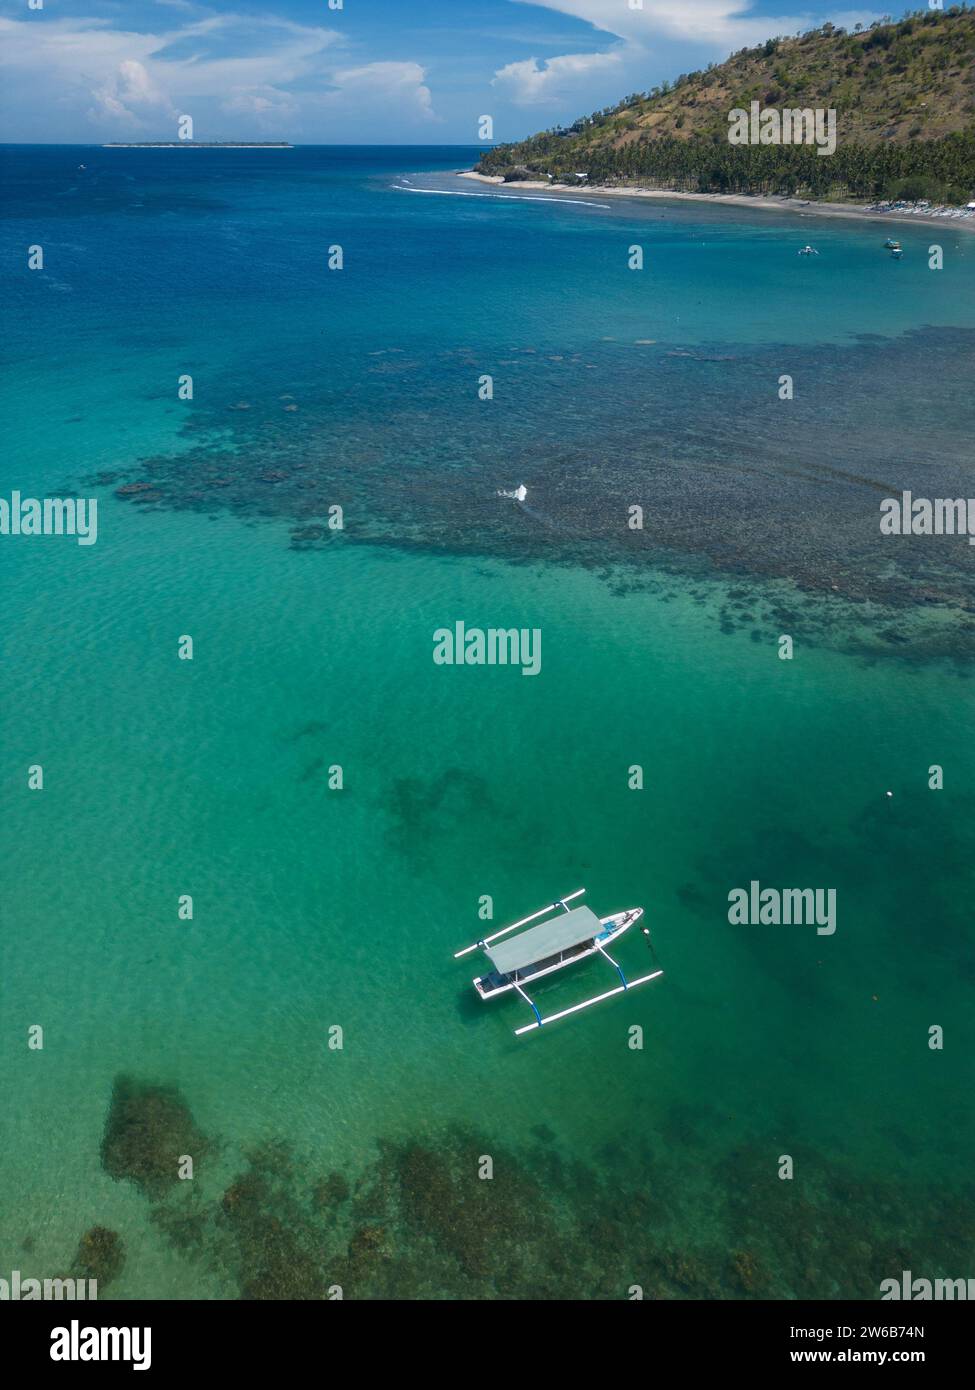 Aerial view of a traditional jukung boat anchored in Indian Ocean at Senggigi beach, Lombok, Indonesia Stock Photo